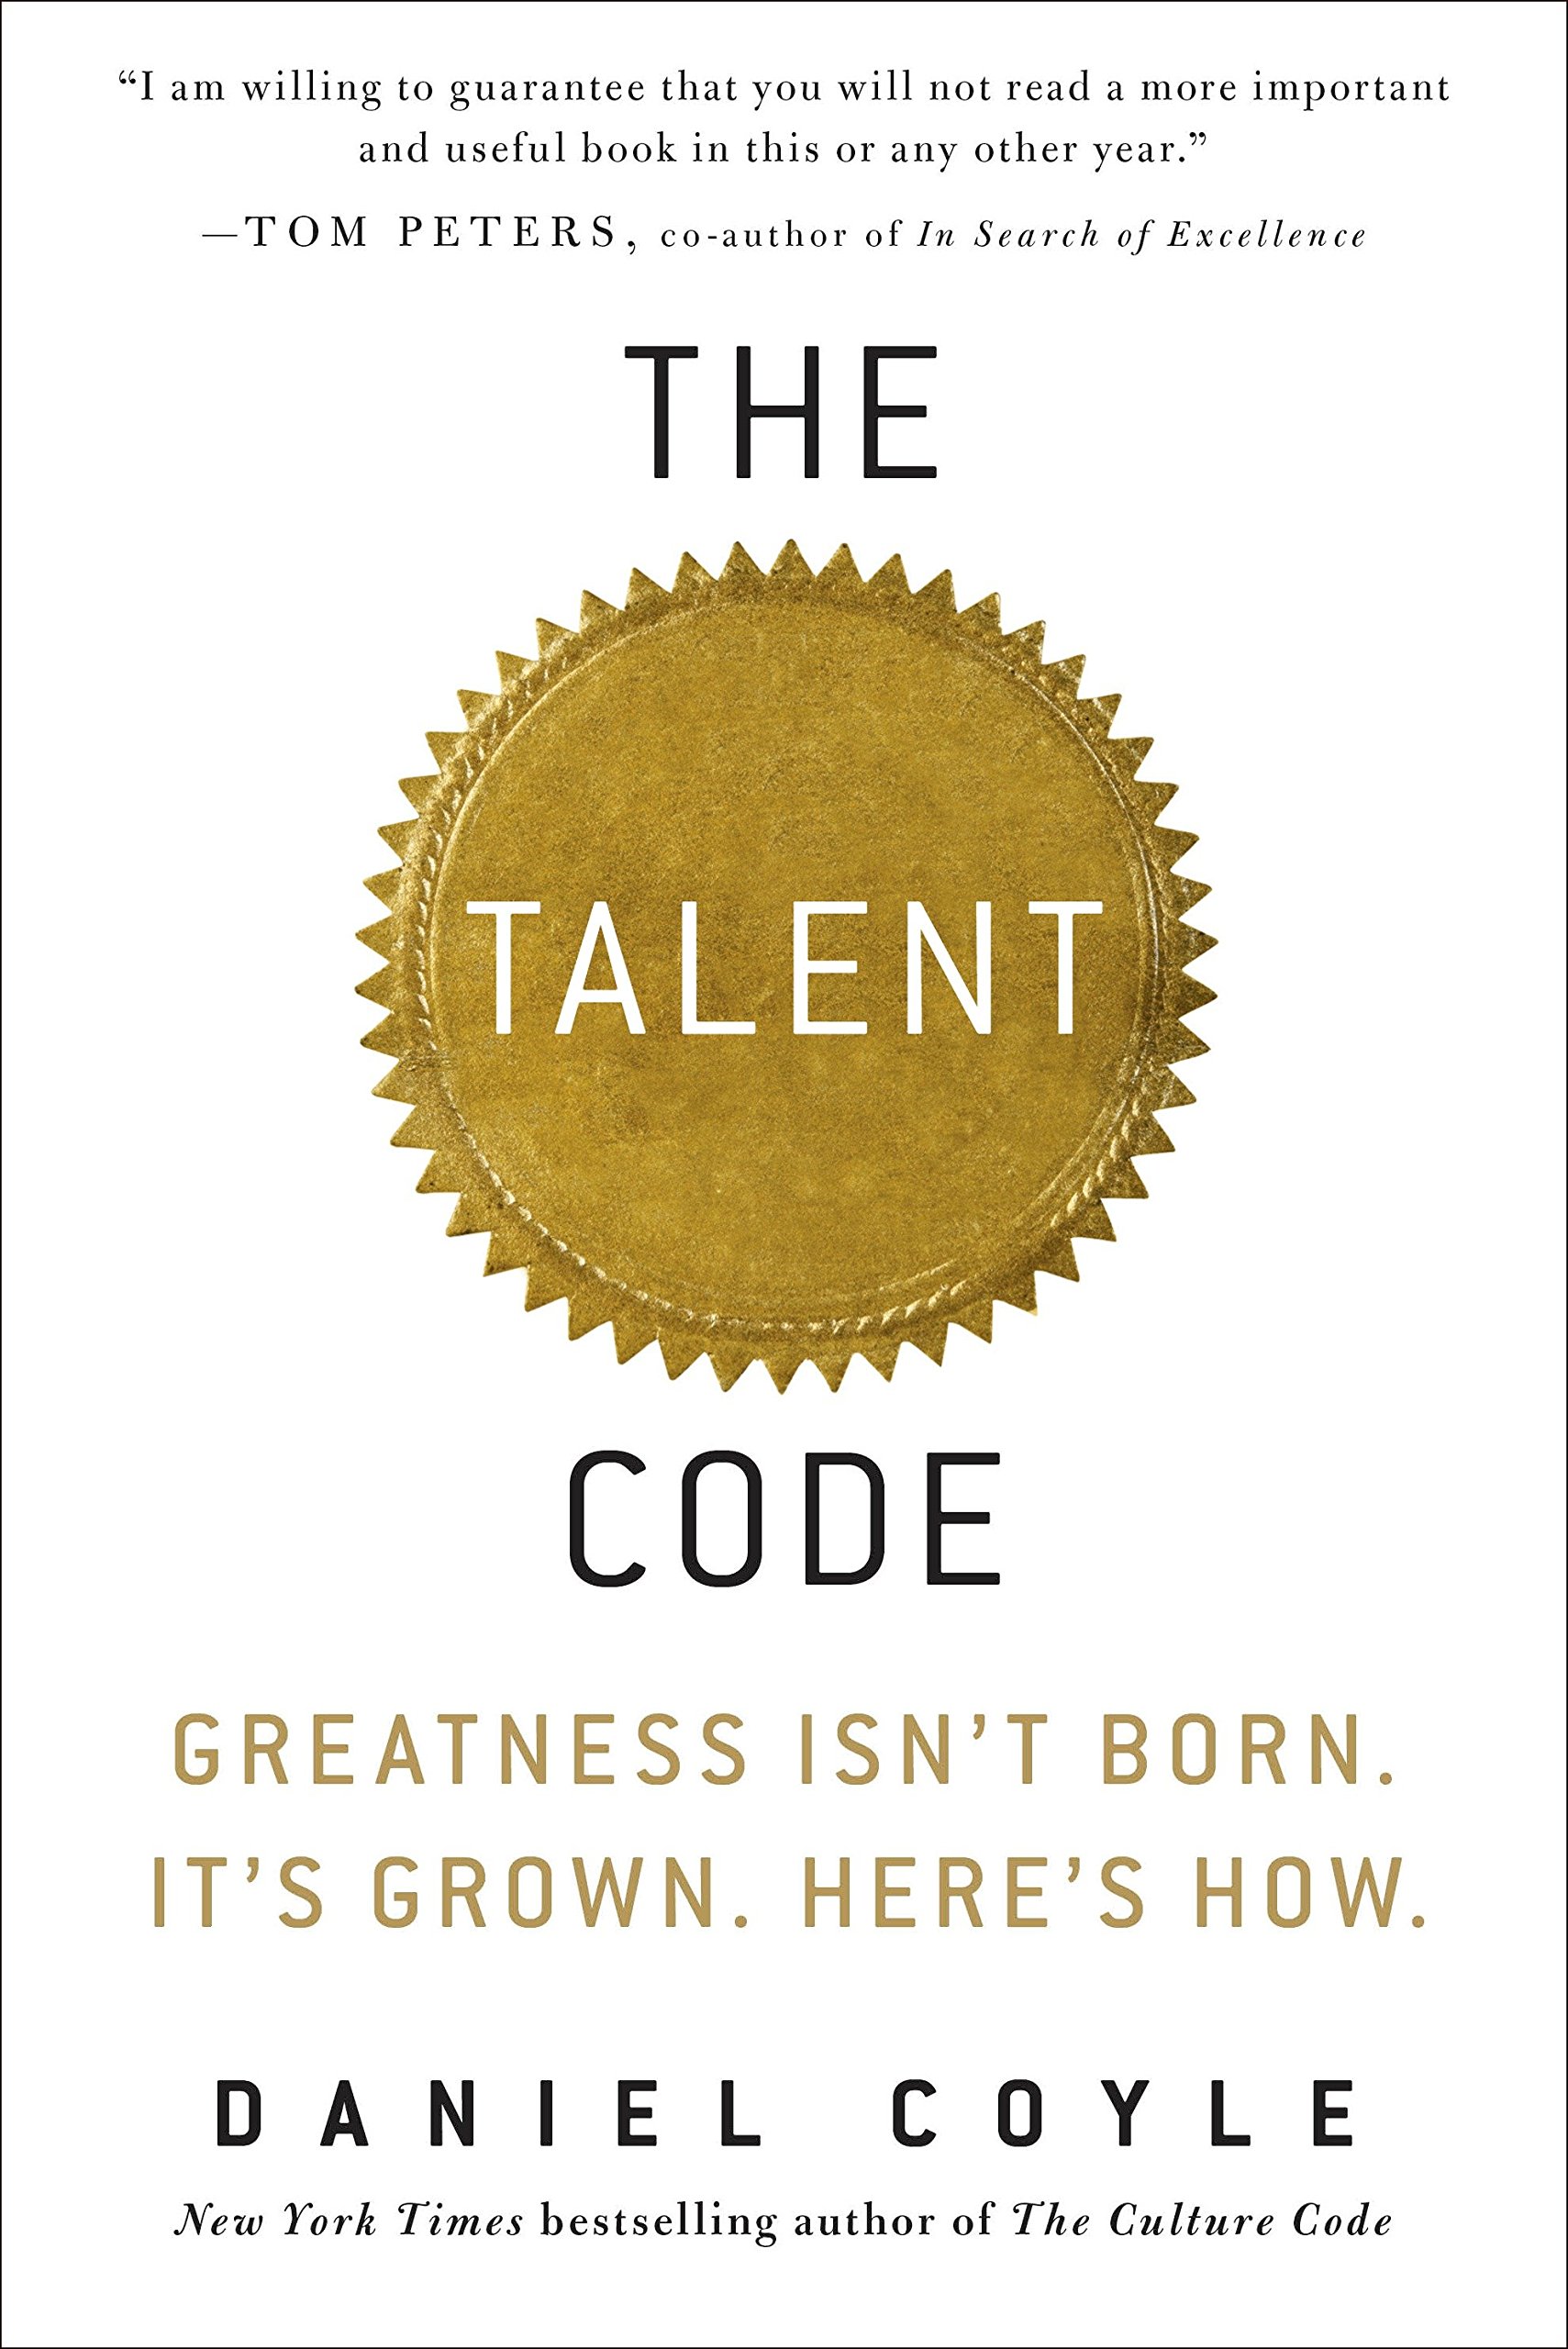 The book cover for The Talent Code.